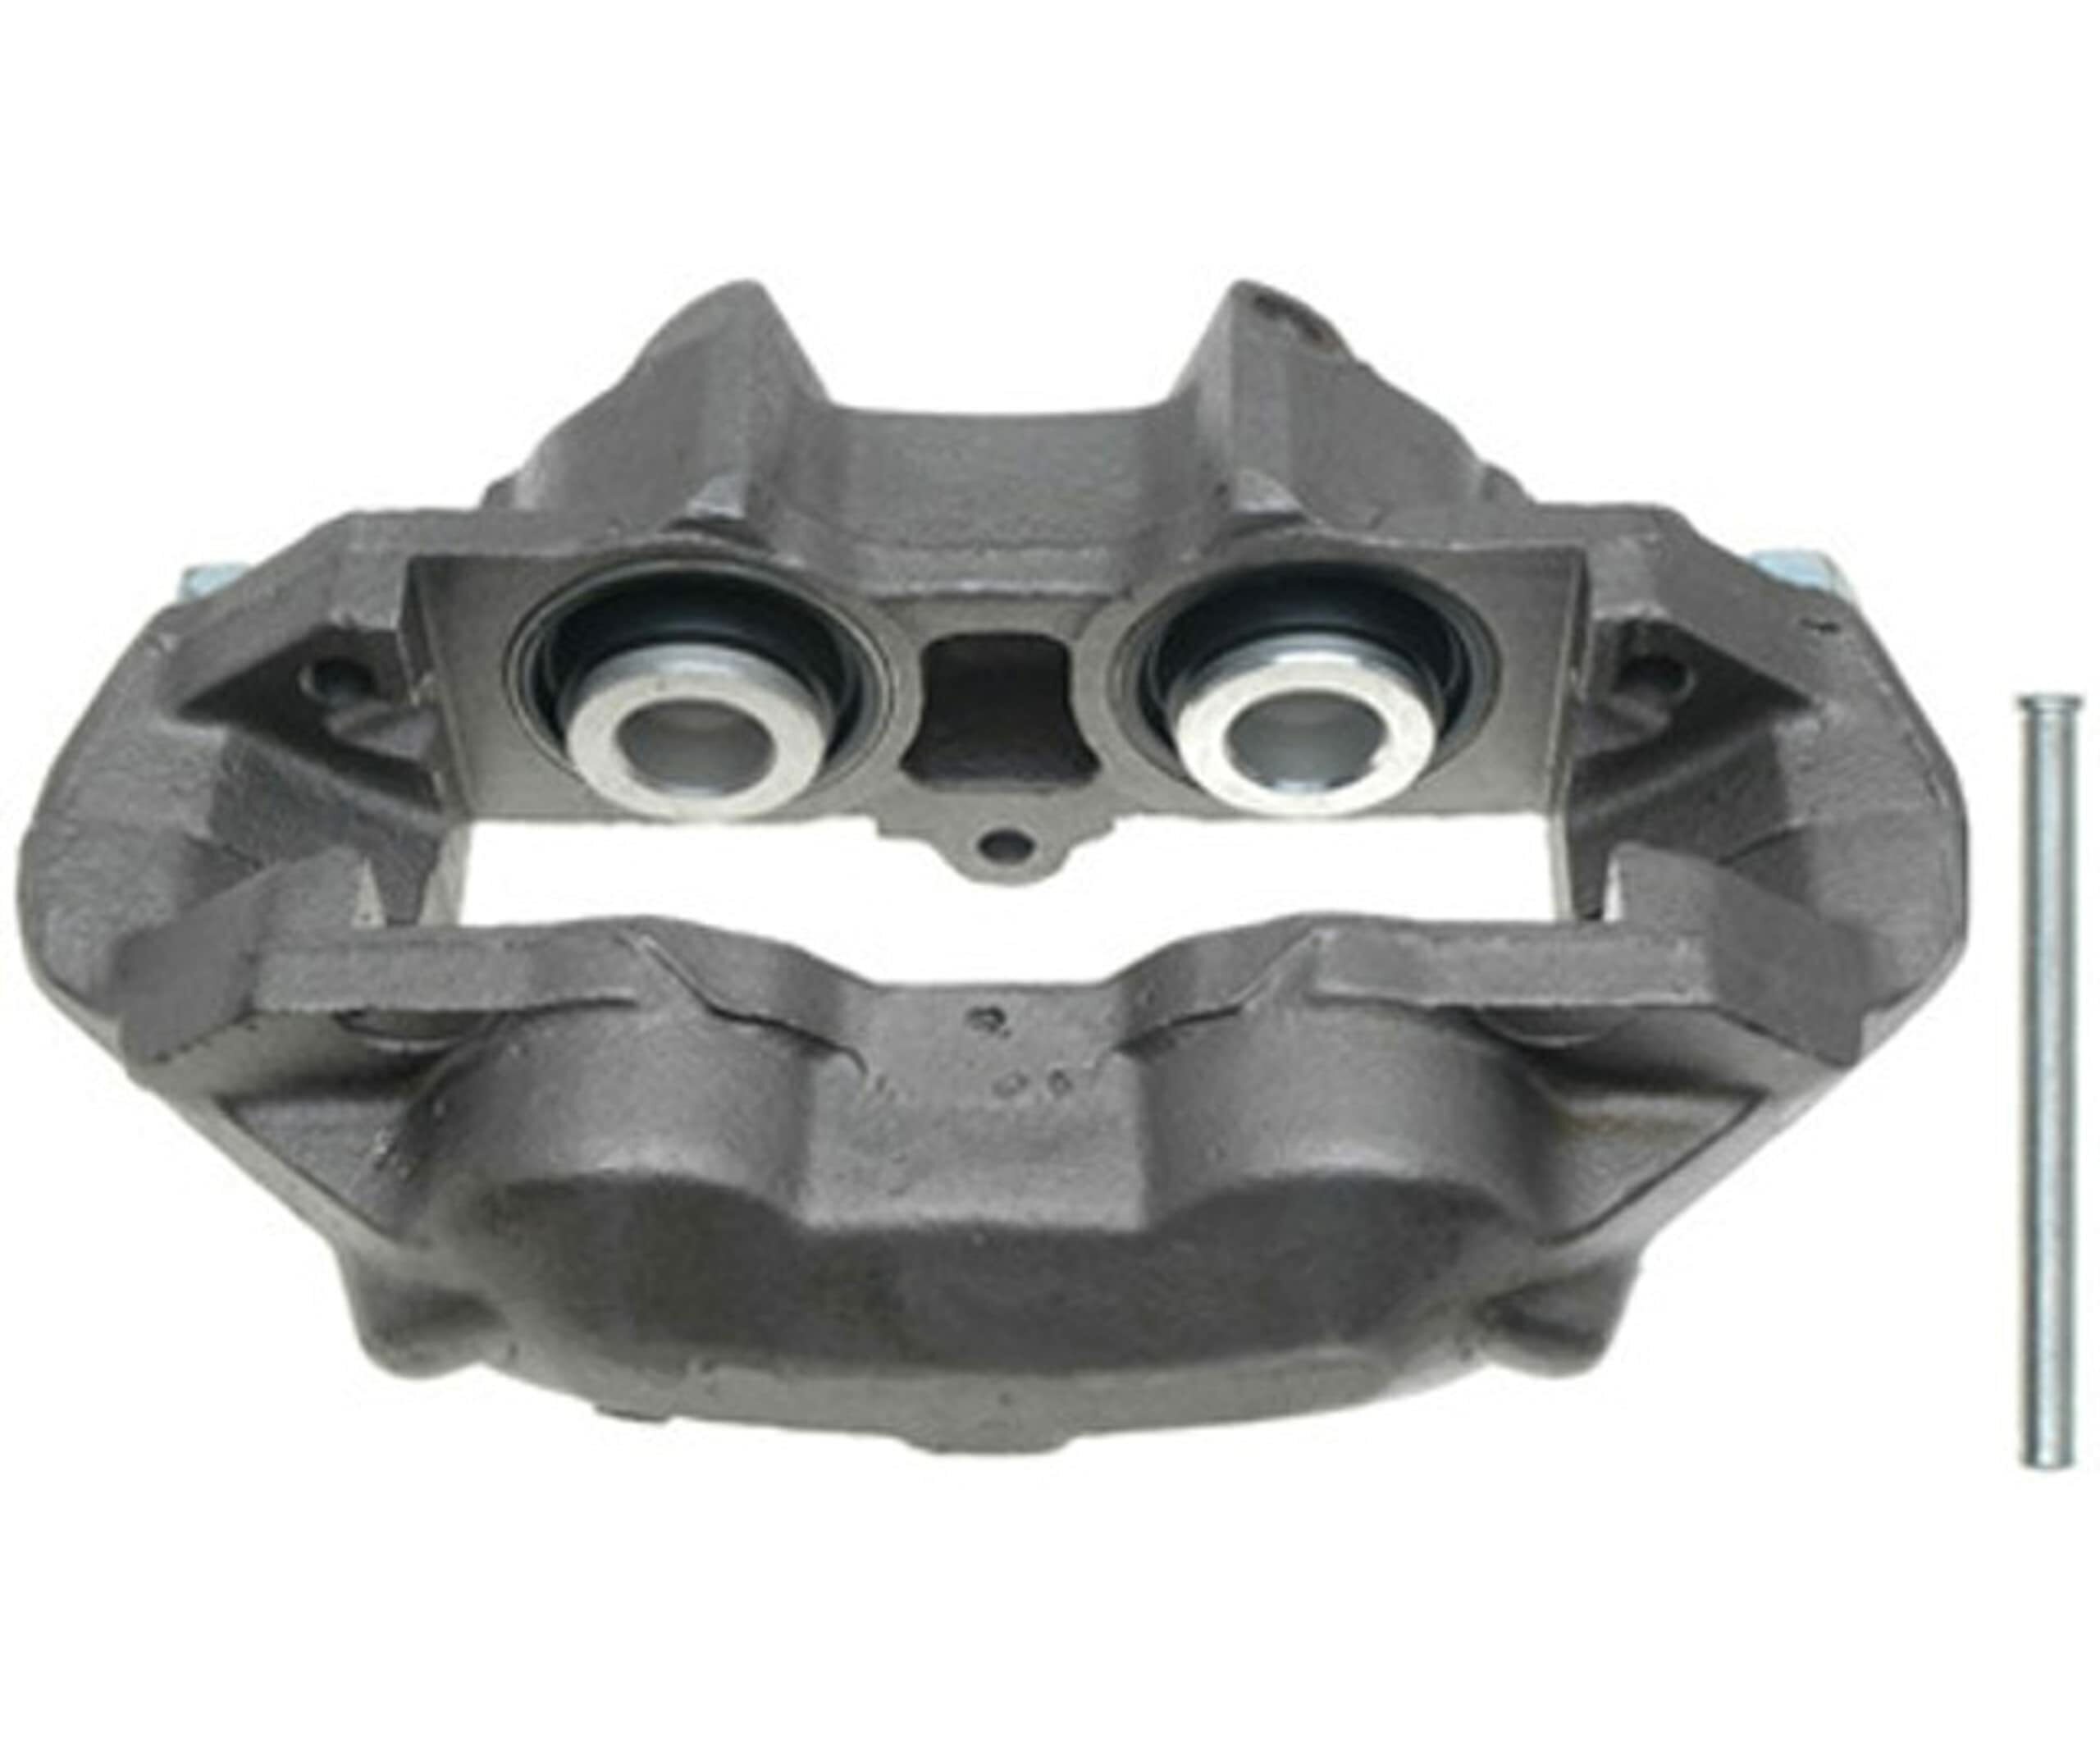 Raybestos RC8001 Professional Grade Remanufactured Loaded Disc Brake Caliper Fits select: 1966-1982 CHEVROLET CORVETTE - image 4 of 6